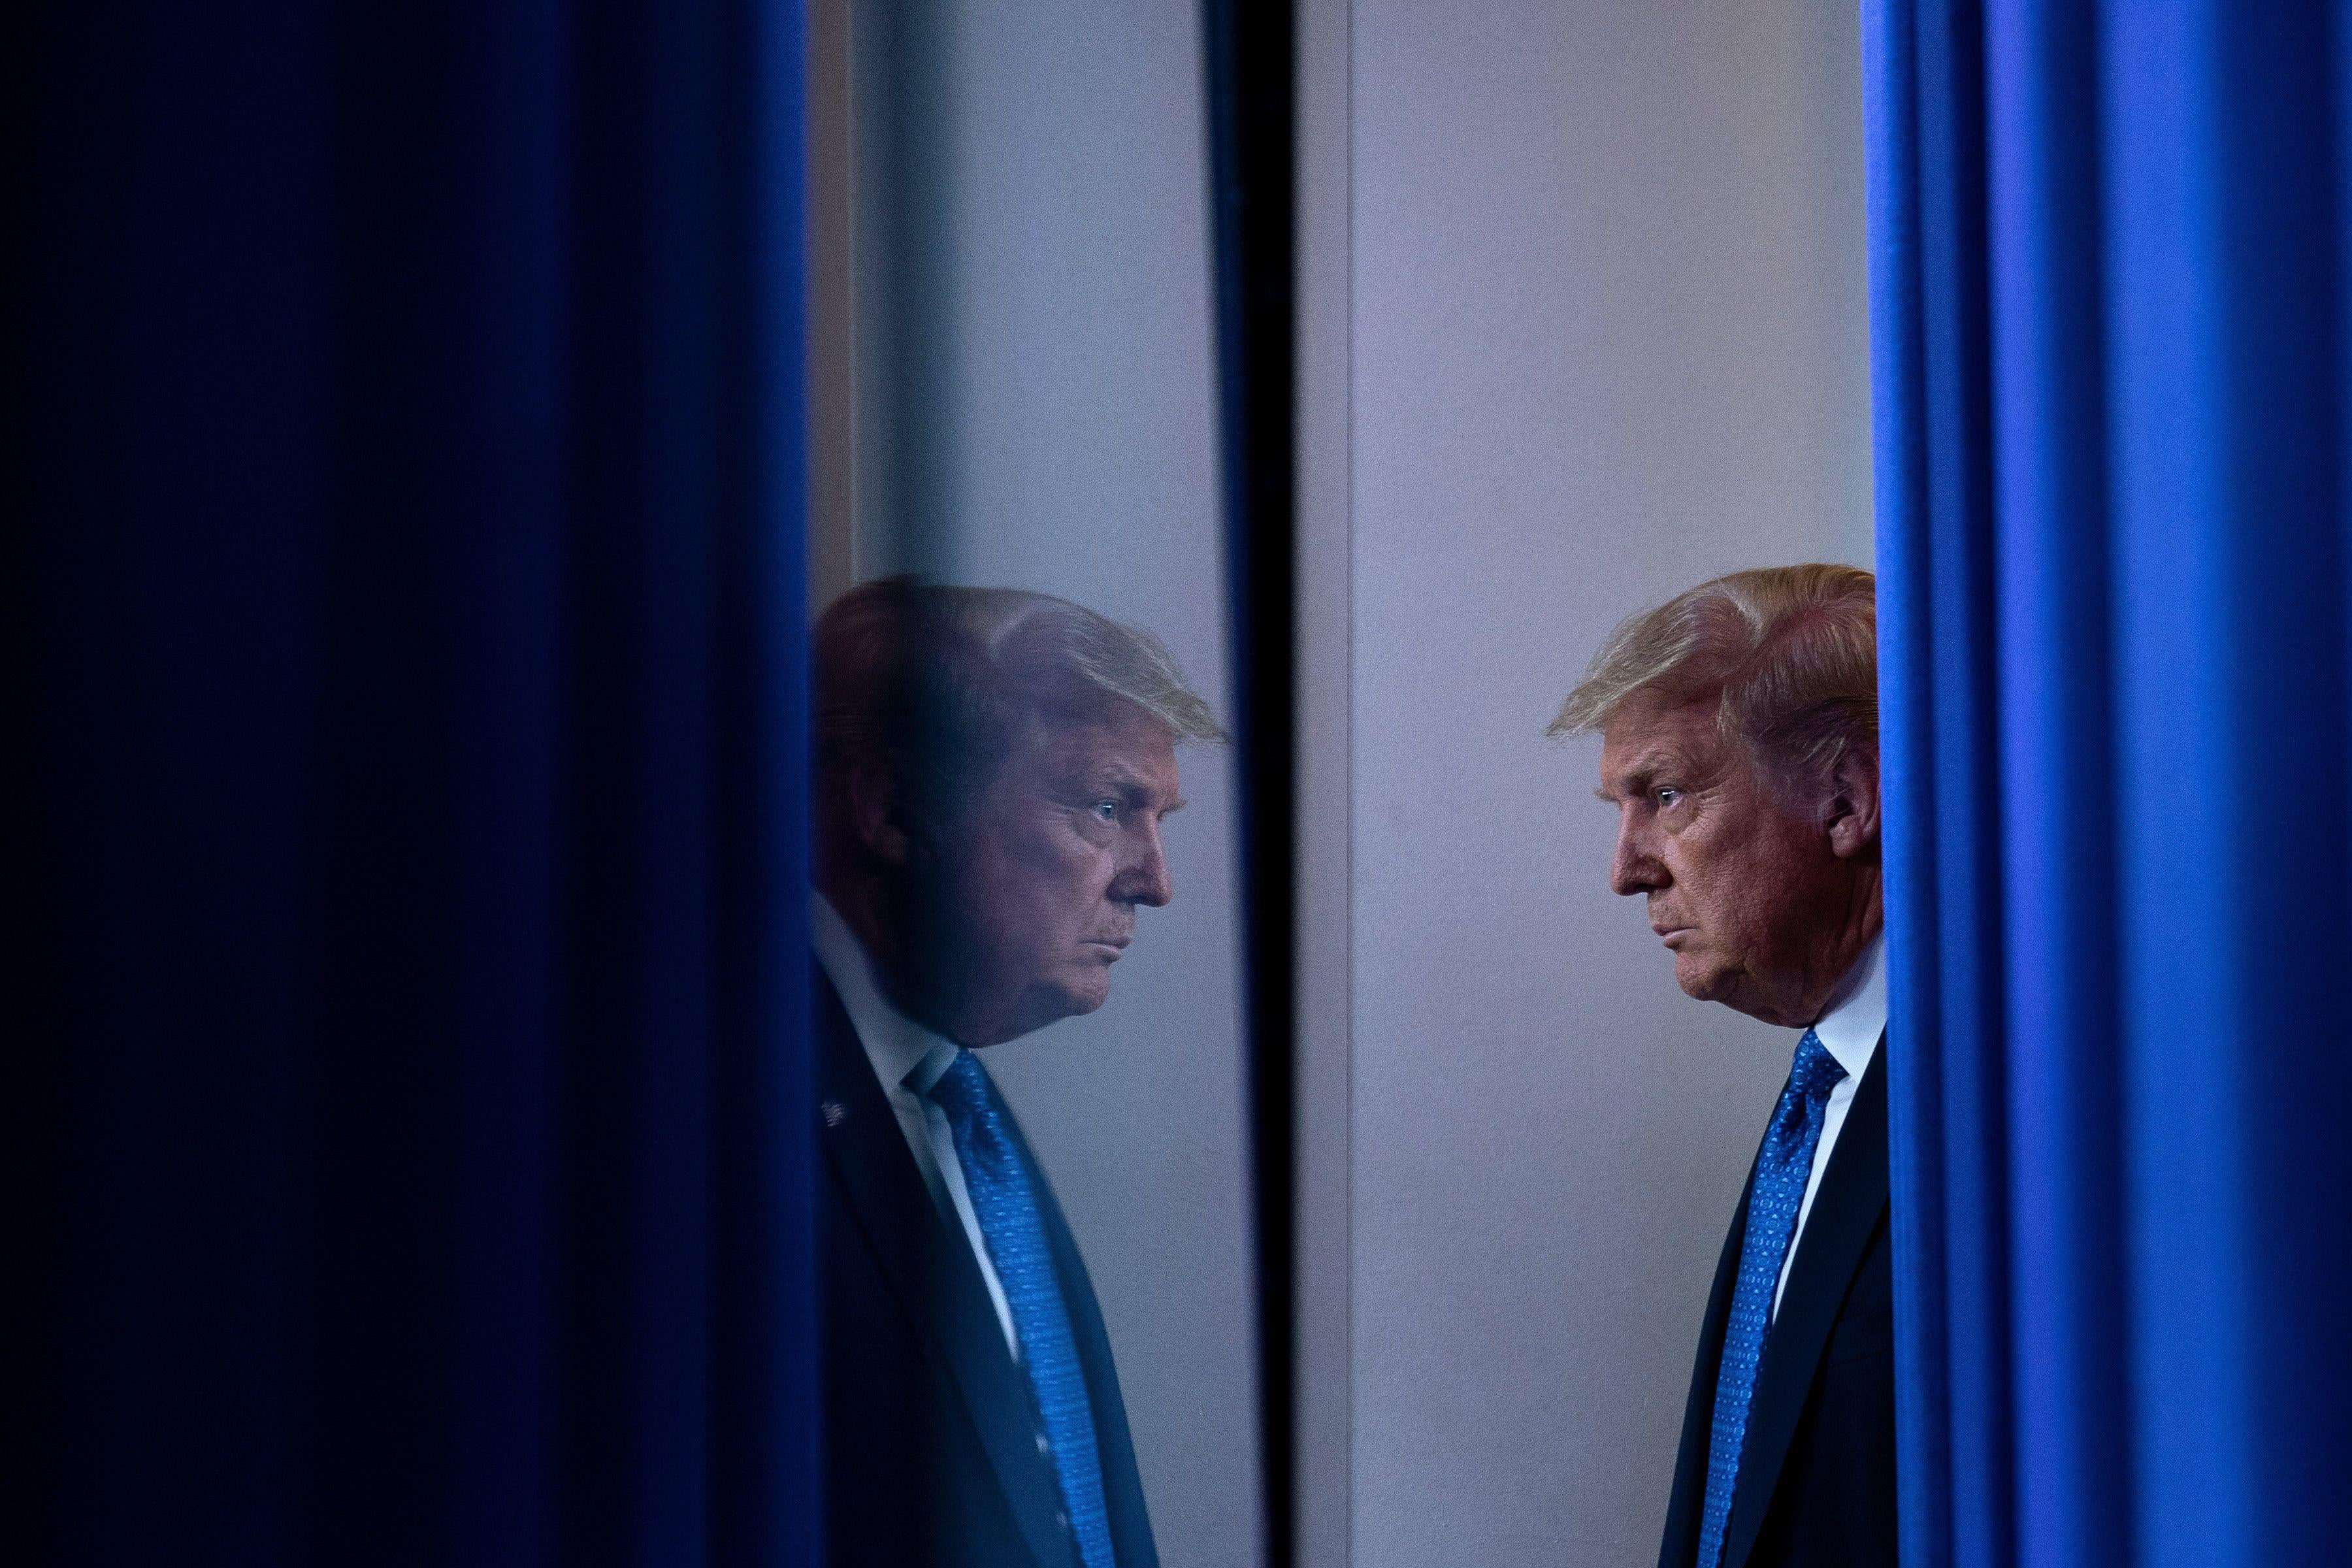 President Donald Trump appears to look at himself in a mirror.